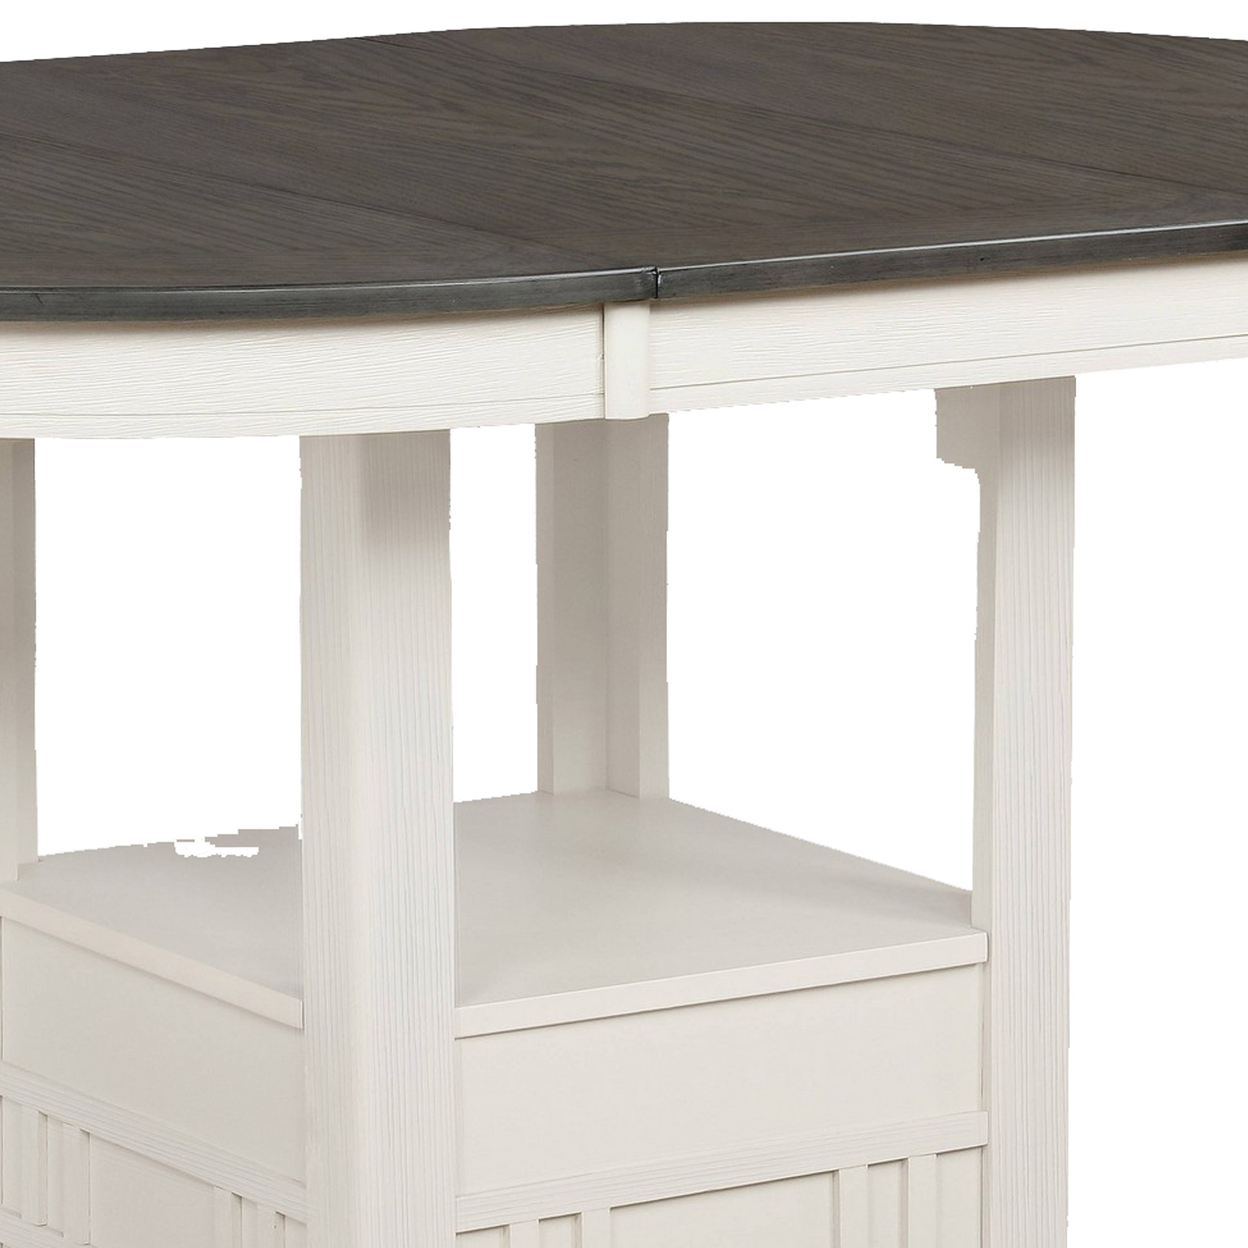 Counter Height Table With Leaf Extension, White And Gray- Saltoro Sherpi